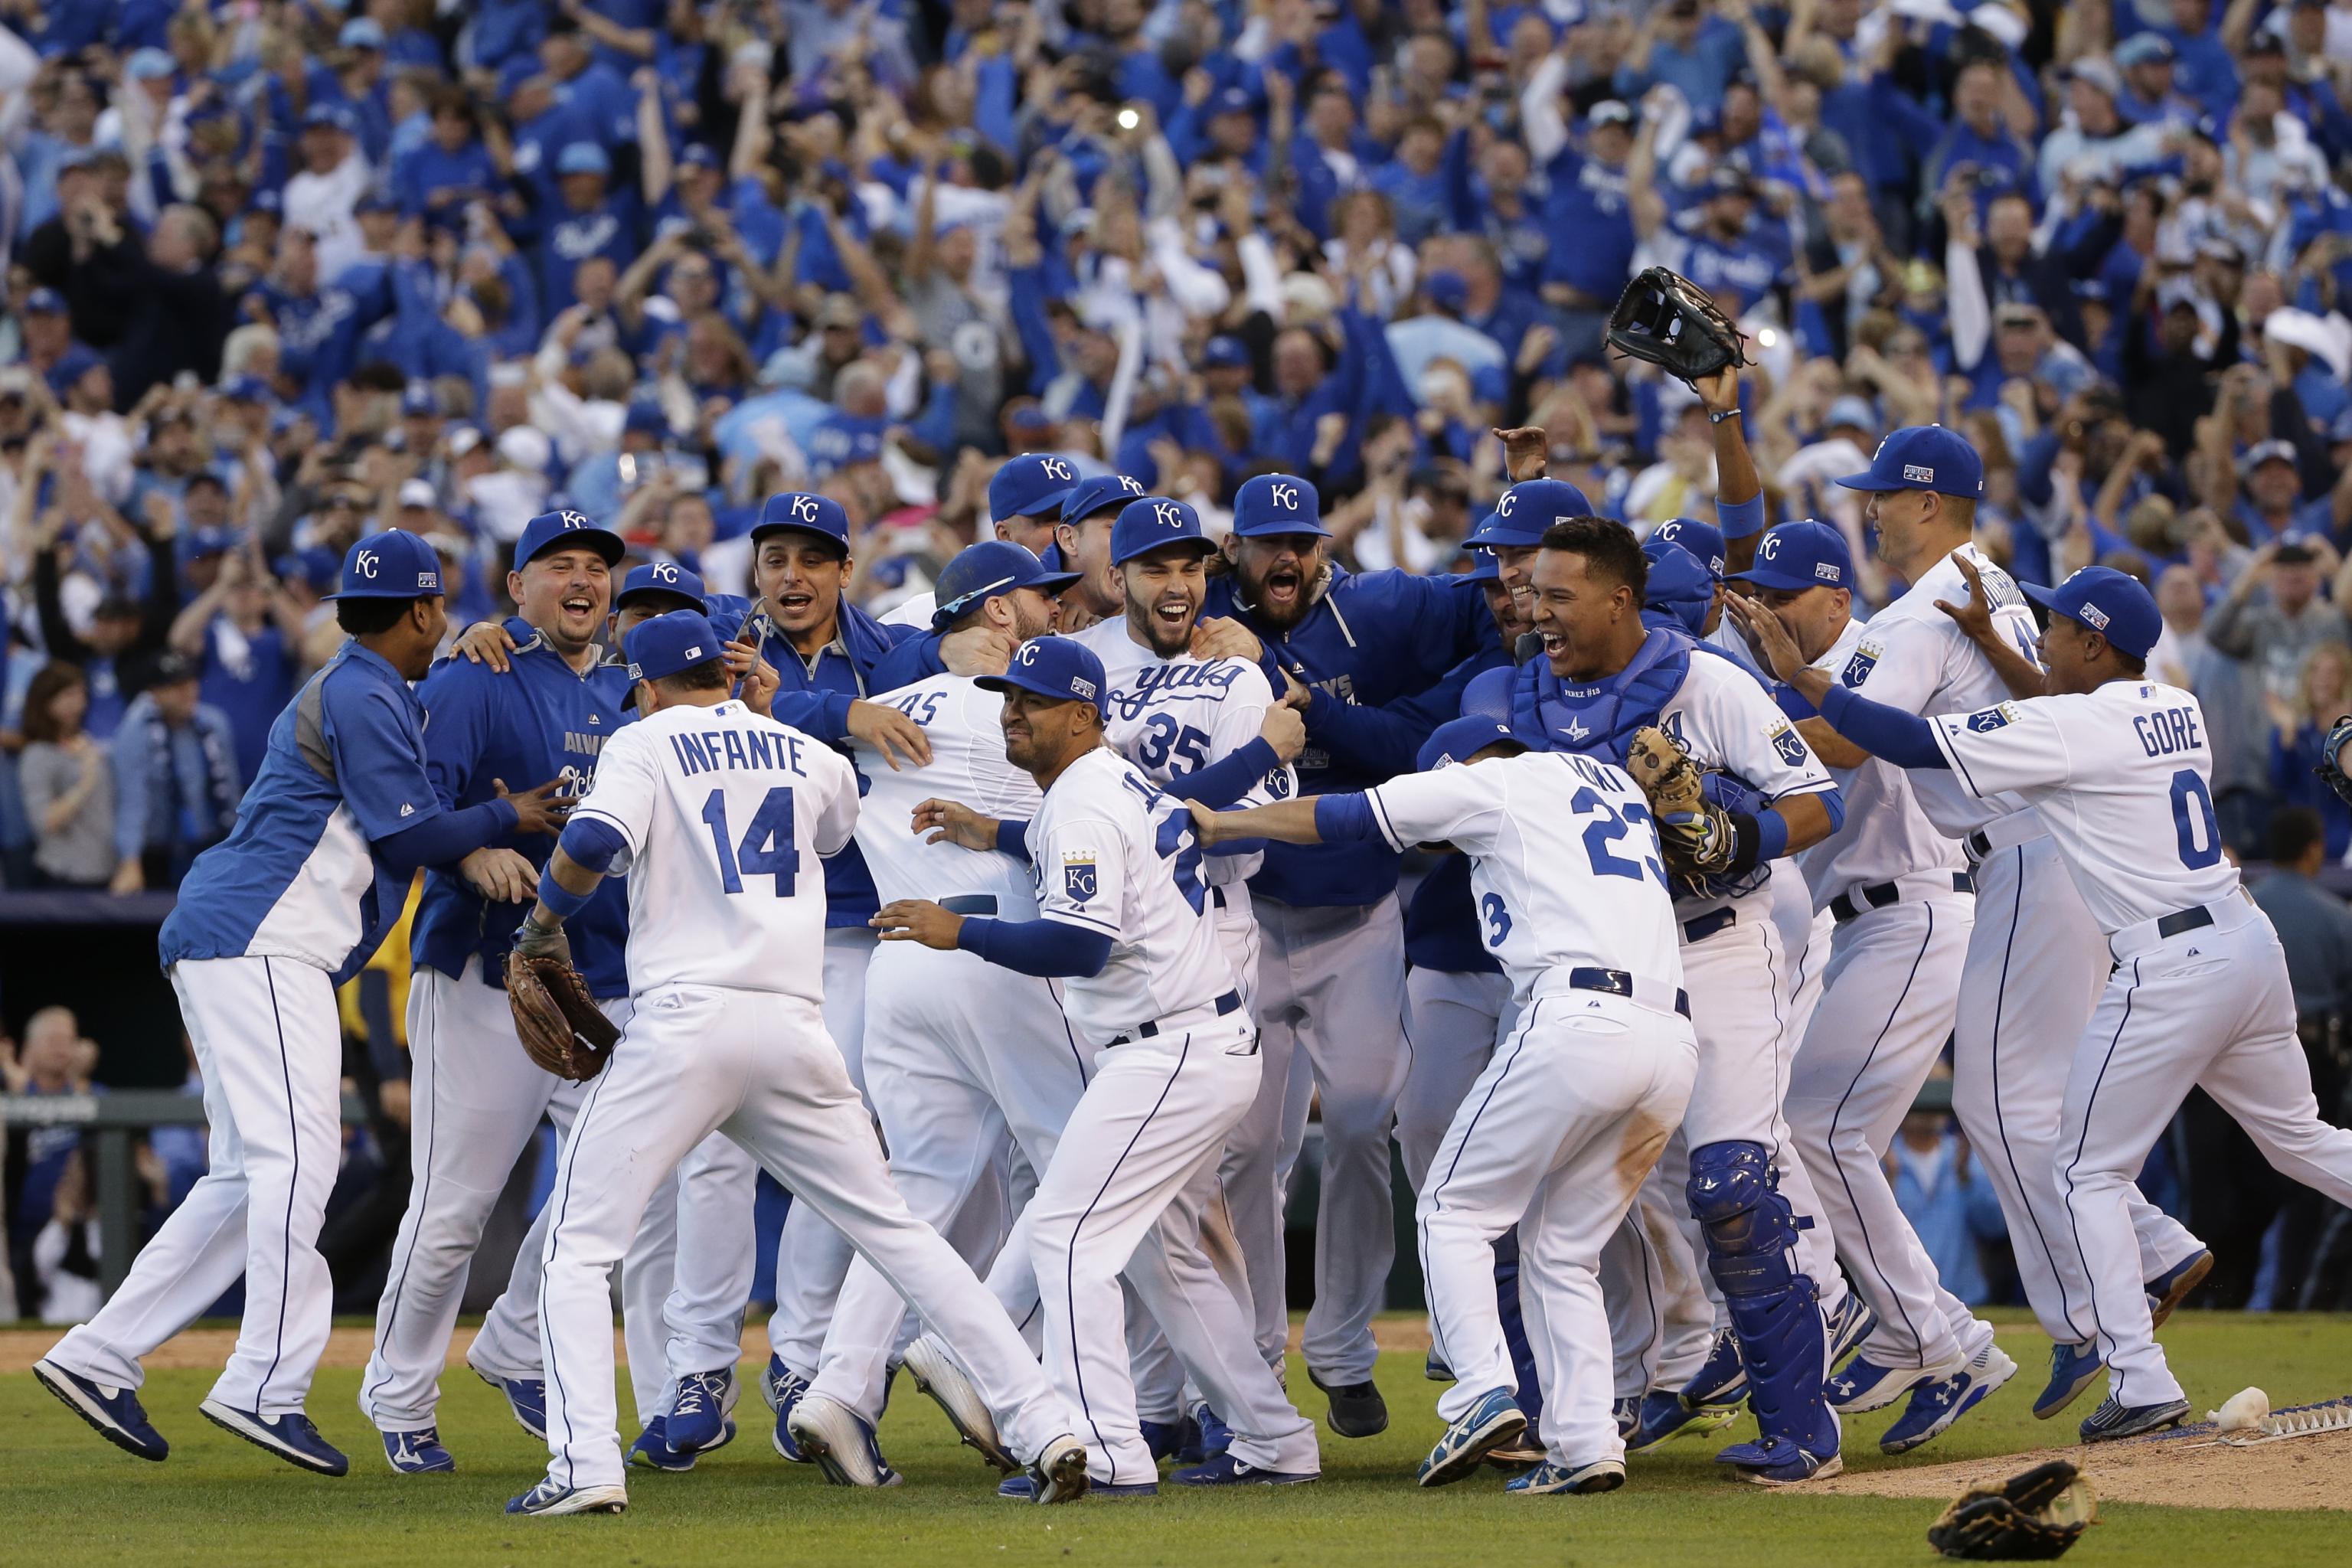 The 1985 KC Royals World Series team: Where are they now?